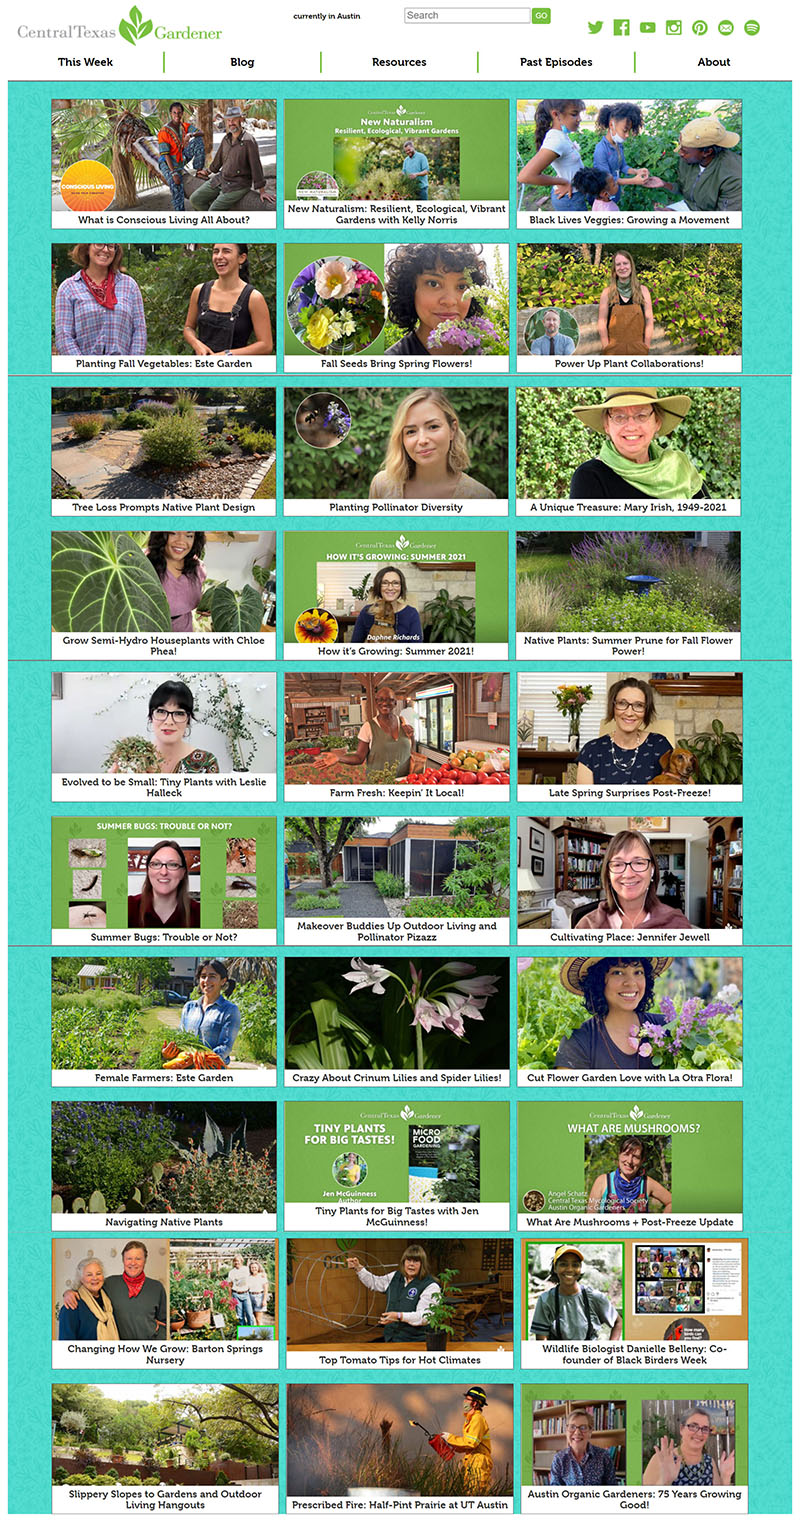 collage of Central Texas Gardener guests